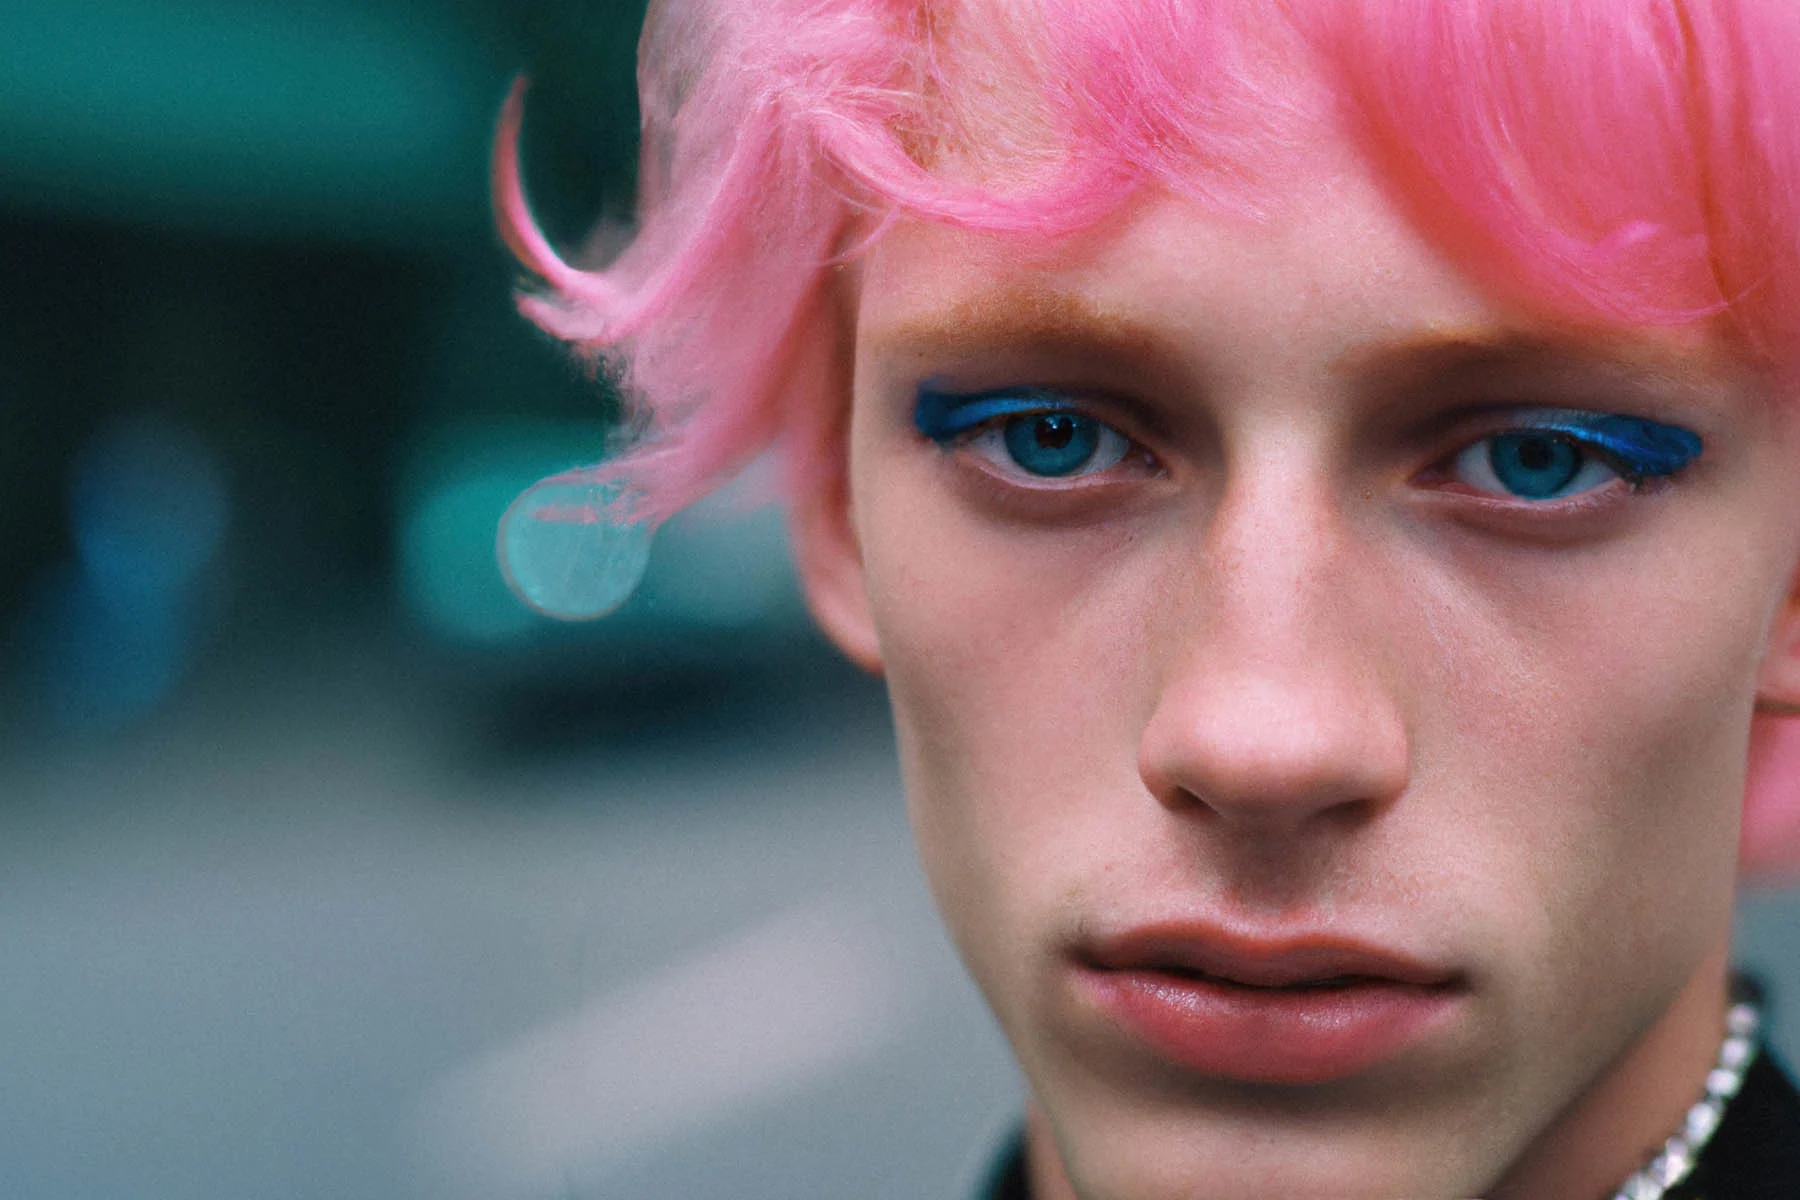 An AI-generated photograph showing a person with bright pink hair and wearing blue eyeliner staring into the camera